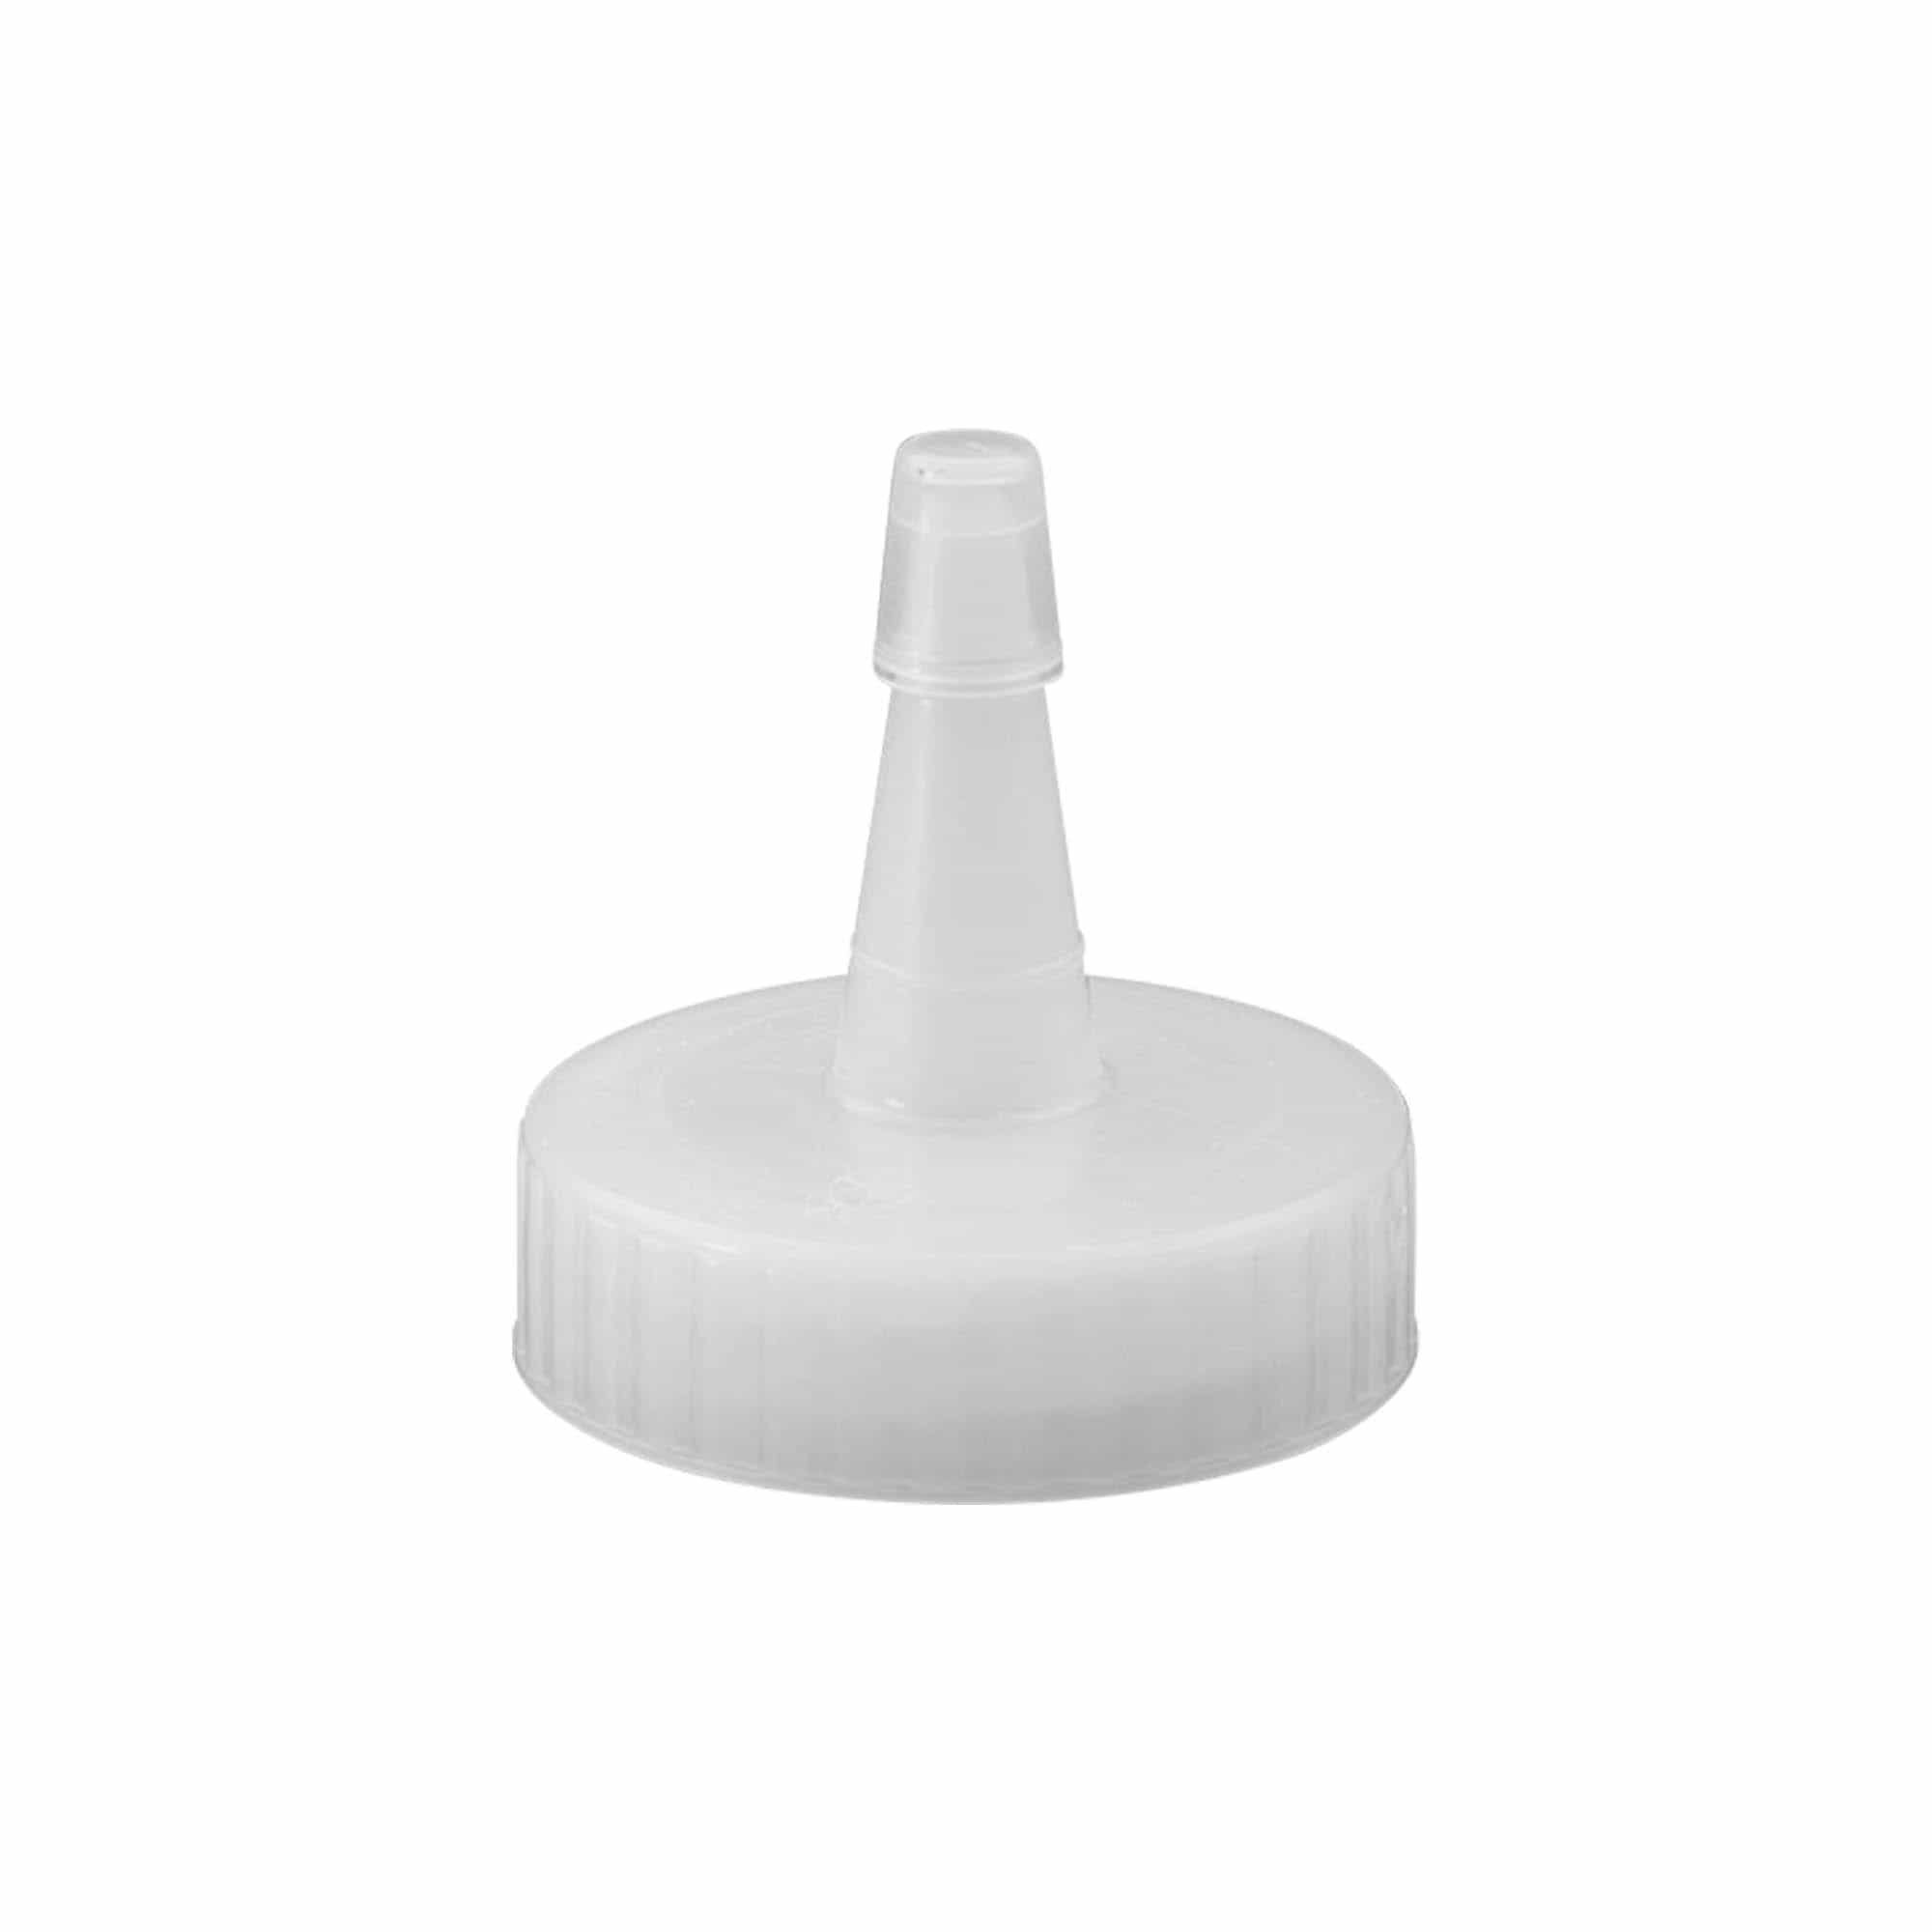 Screw cap with spray nozzle, PP plastic, white, for opening: GPI 38/400